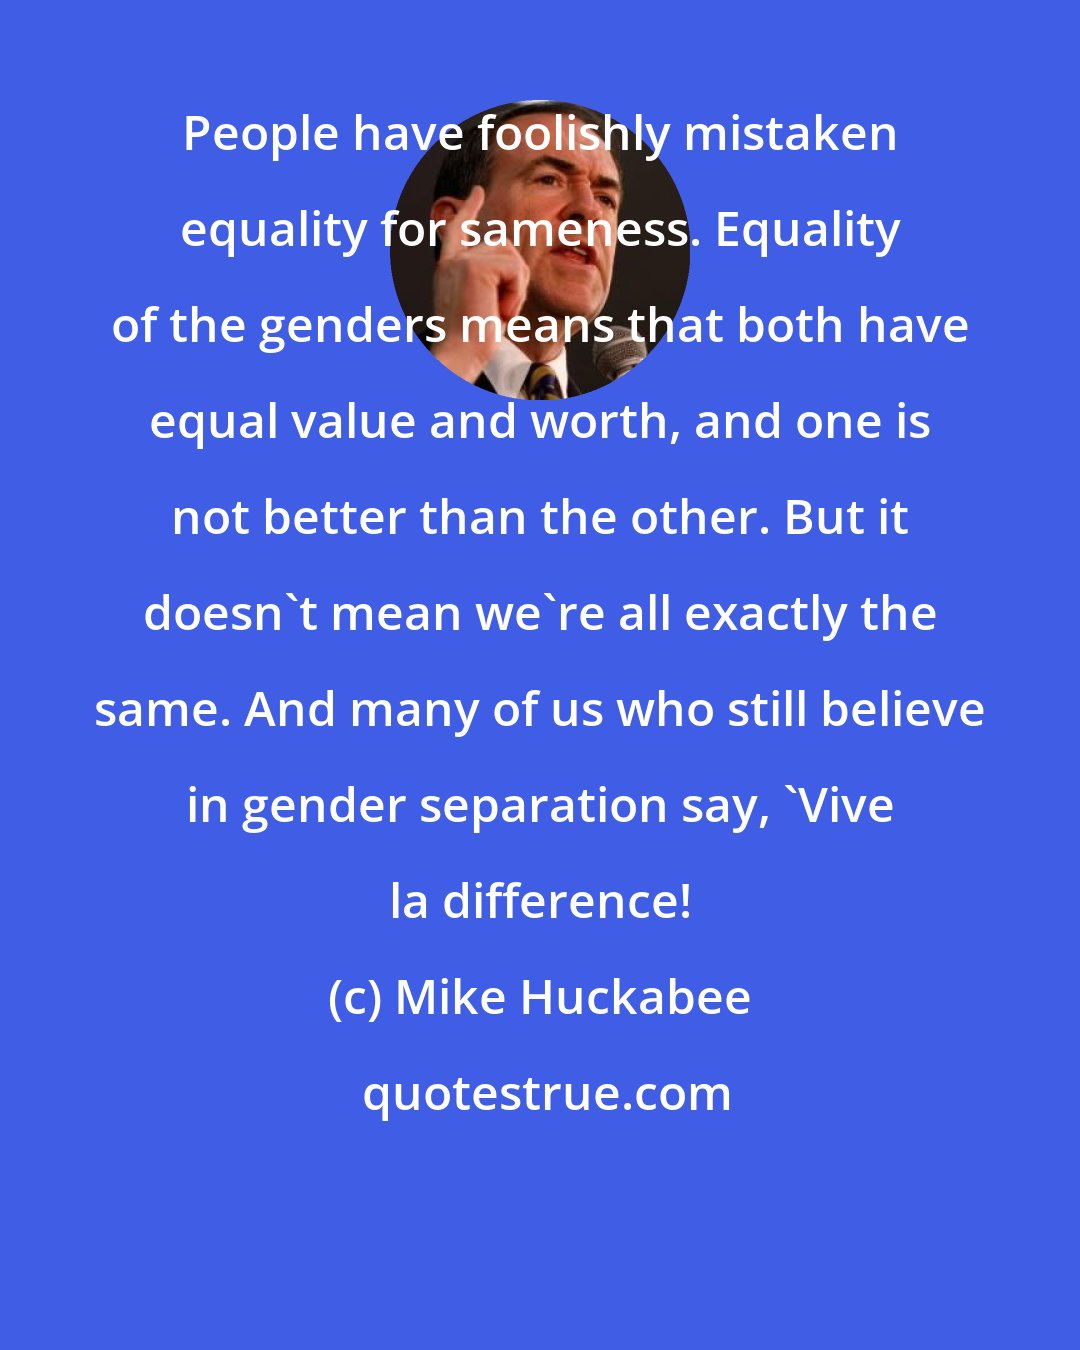 Mike Huckabee: People have foolishly mistaken equality for sameness. Equality of the genders means that both have equal value and worth, and one is not better than the other. But it doesn't mean we're all exactly the same. And many of us who still believe in gender separation say, 'Vive la difference!